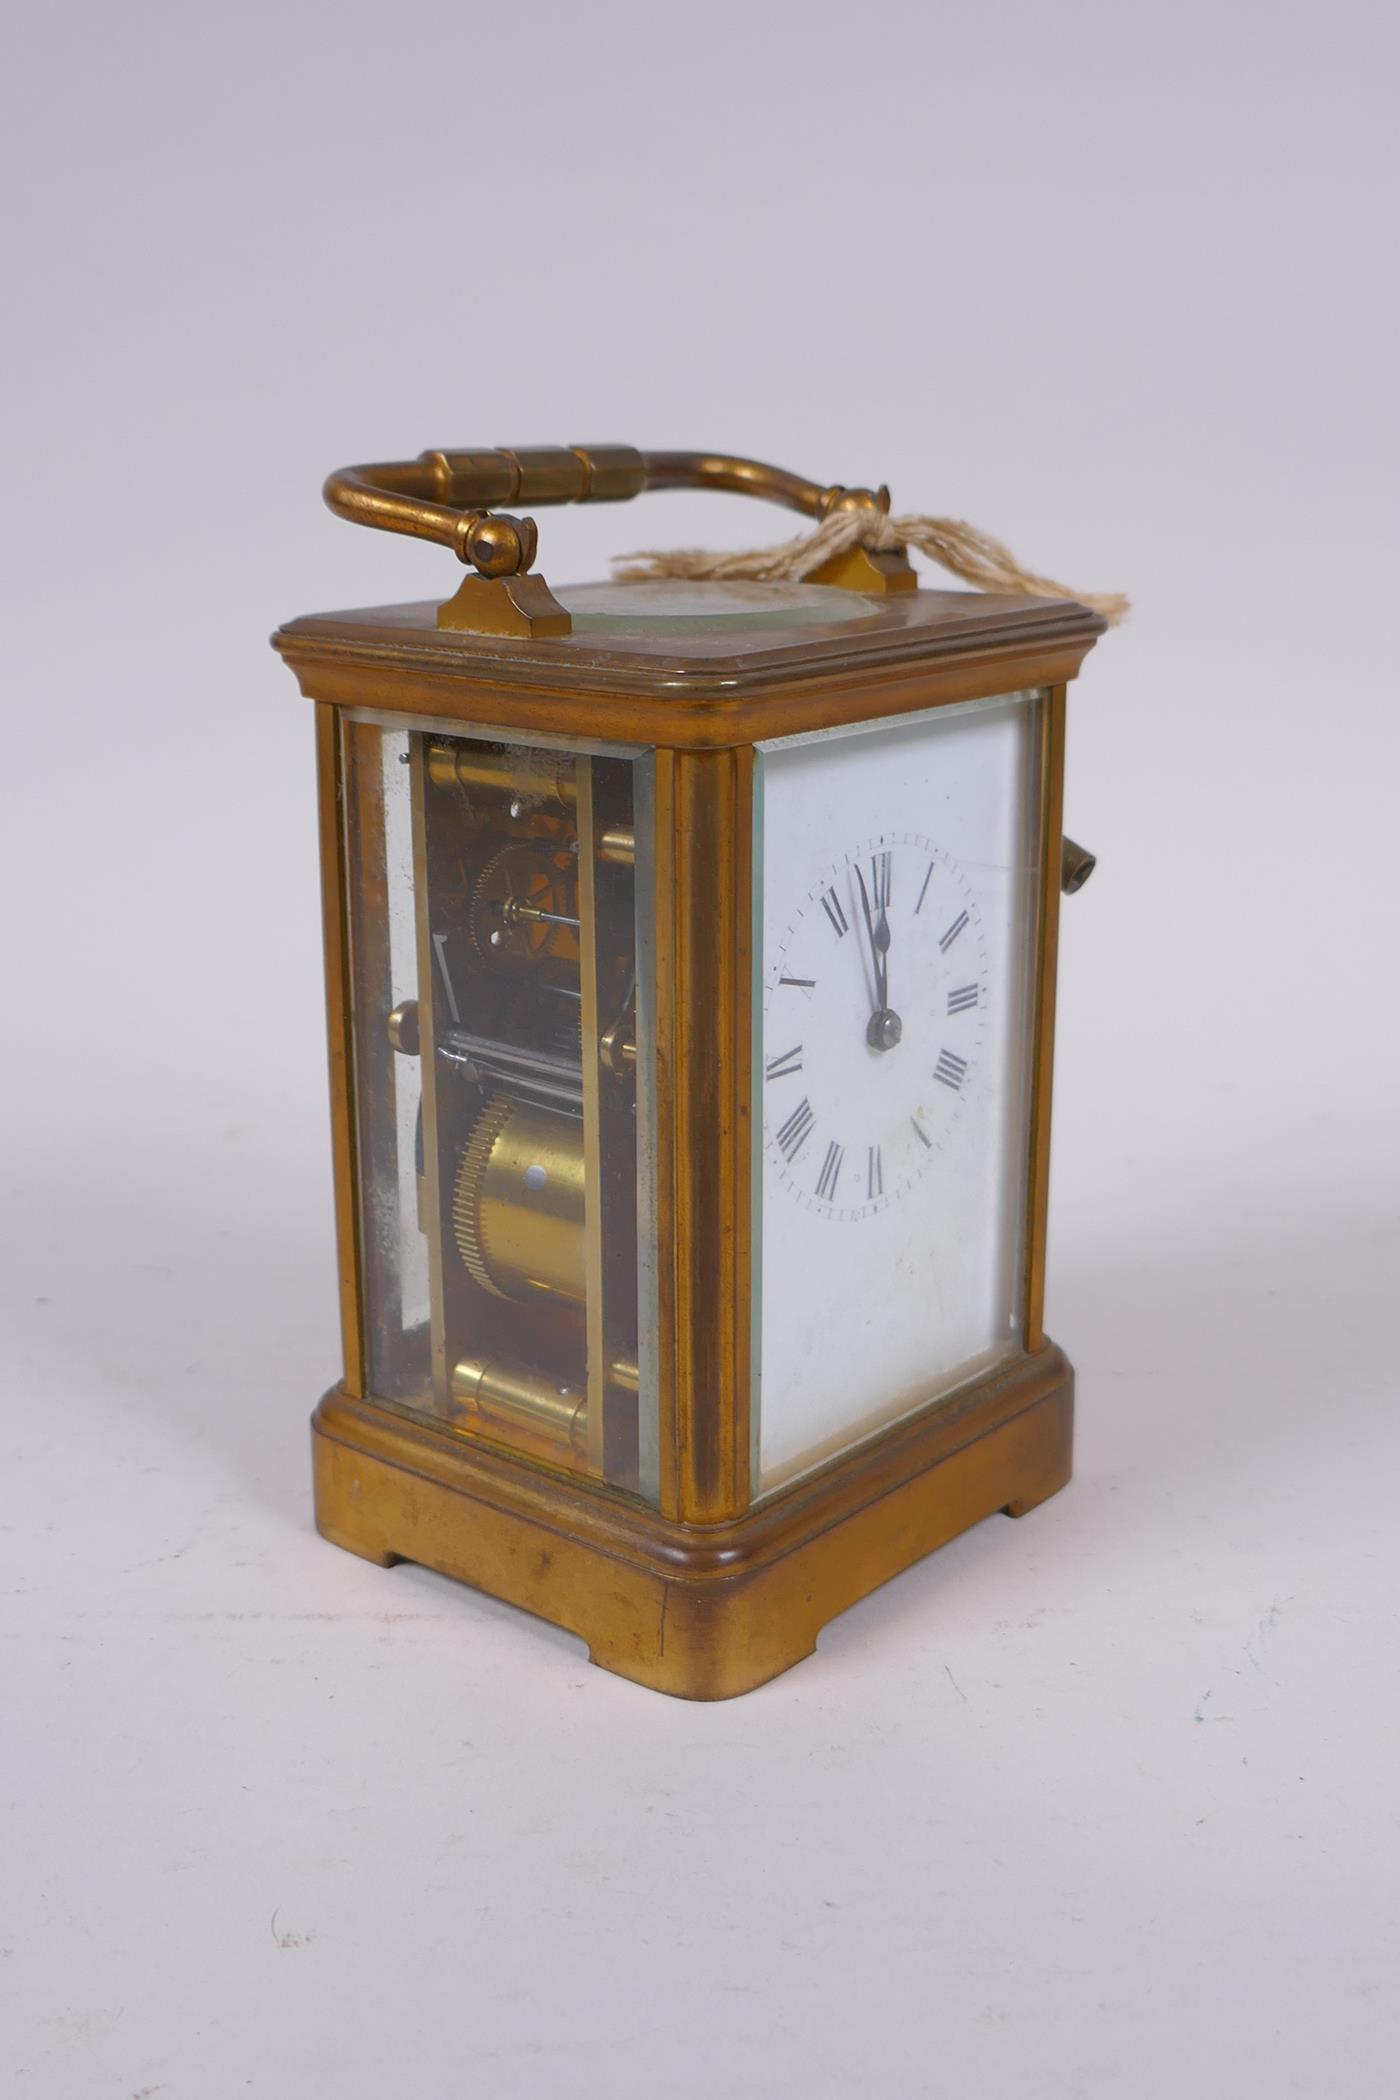 An early C20th French brass carriage clock striking on a gong by Richard & Cie,9 x 8cm, 14cm high - Image 2 of 6